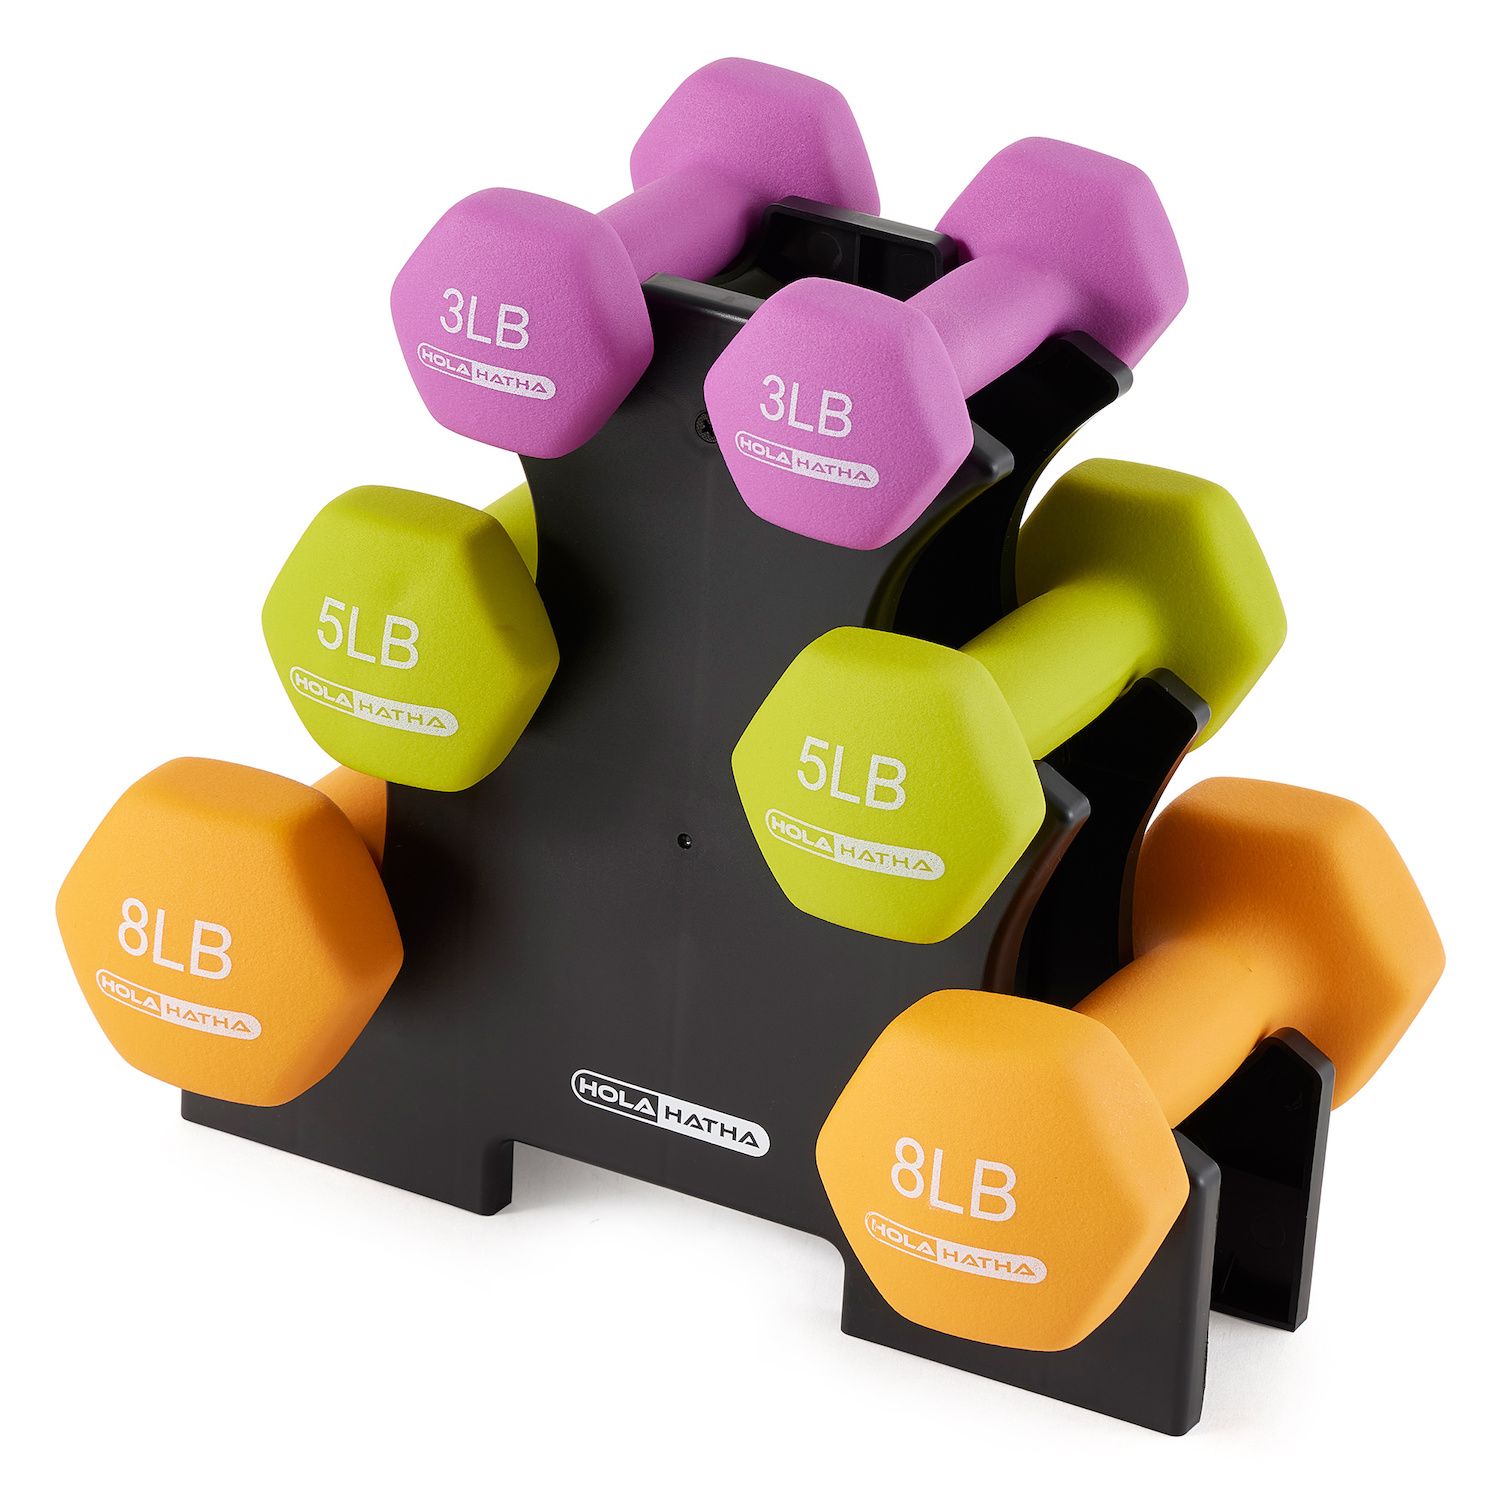 Image for HolaHatha Dumbbell Weight Set w/ 3, 5 and 8 Pound Hand Weights and Storage Rack at Kohl's.